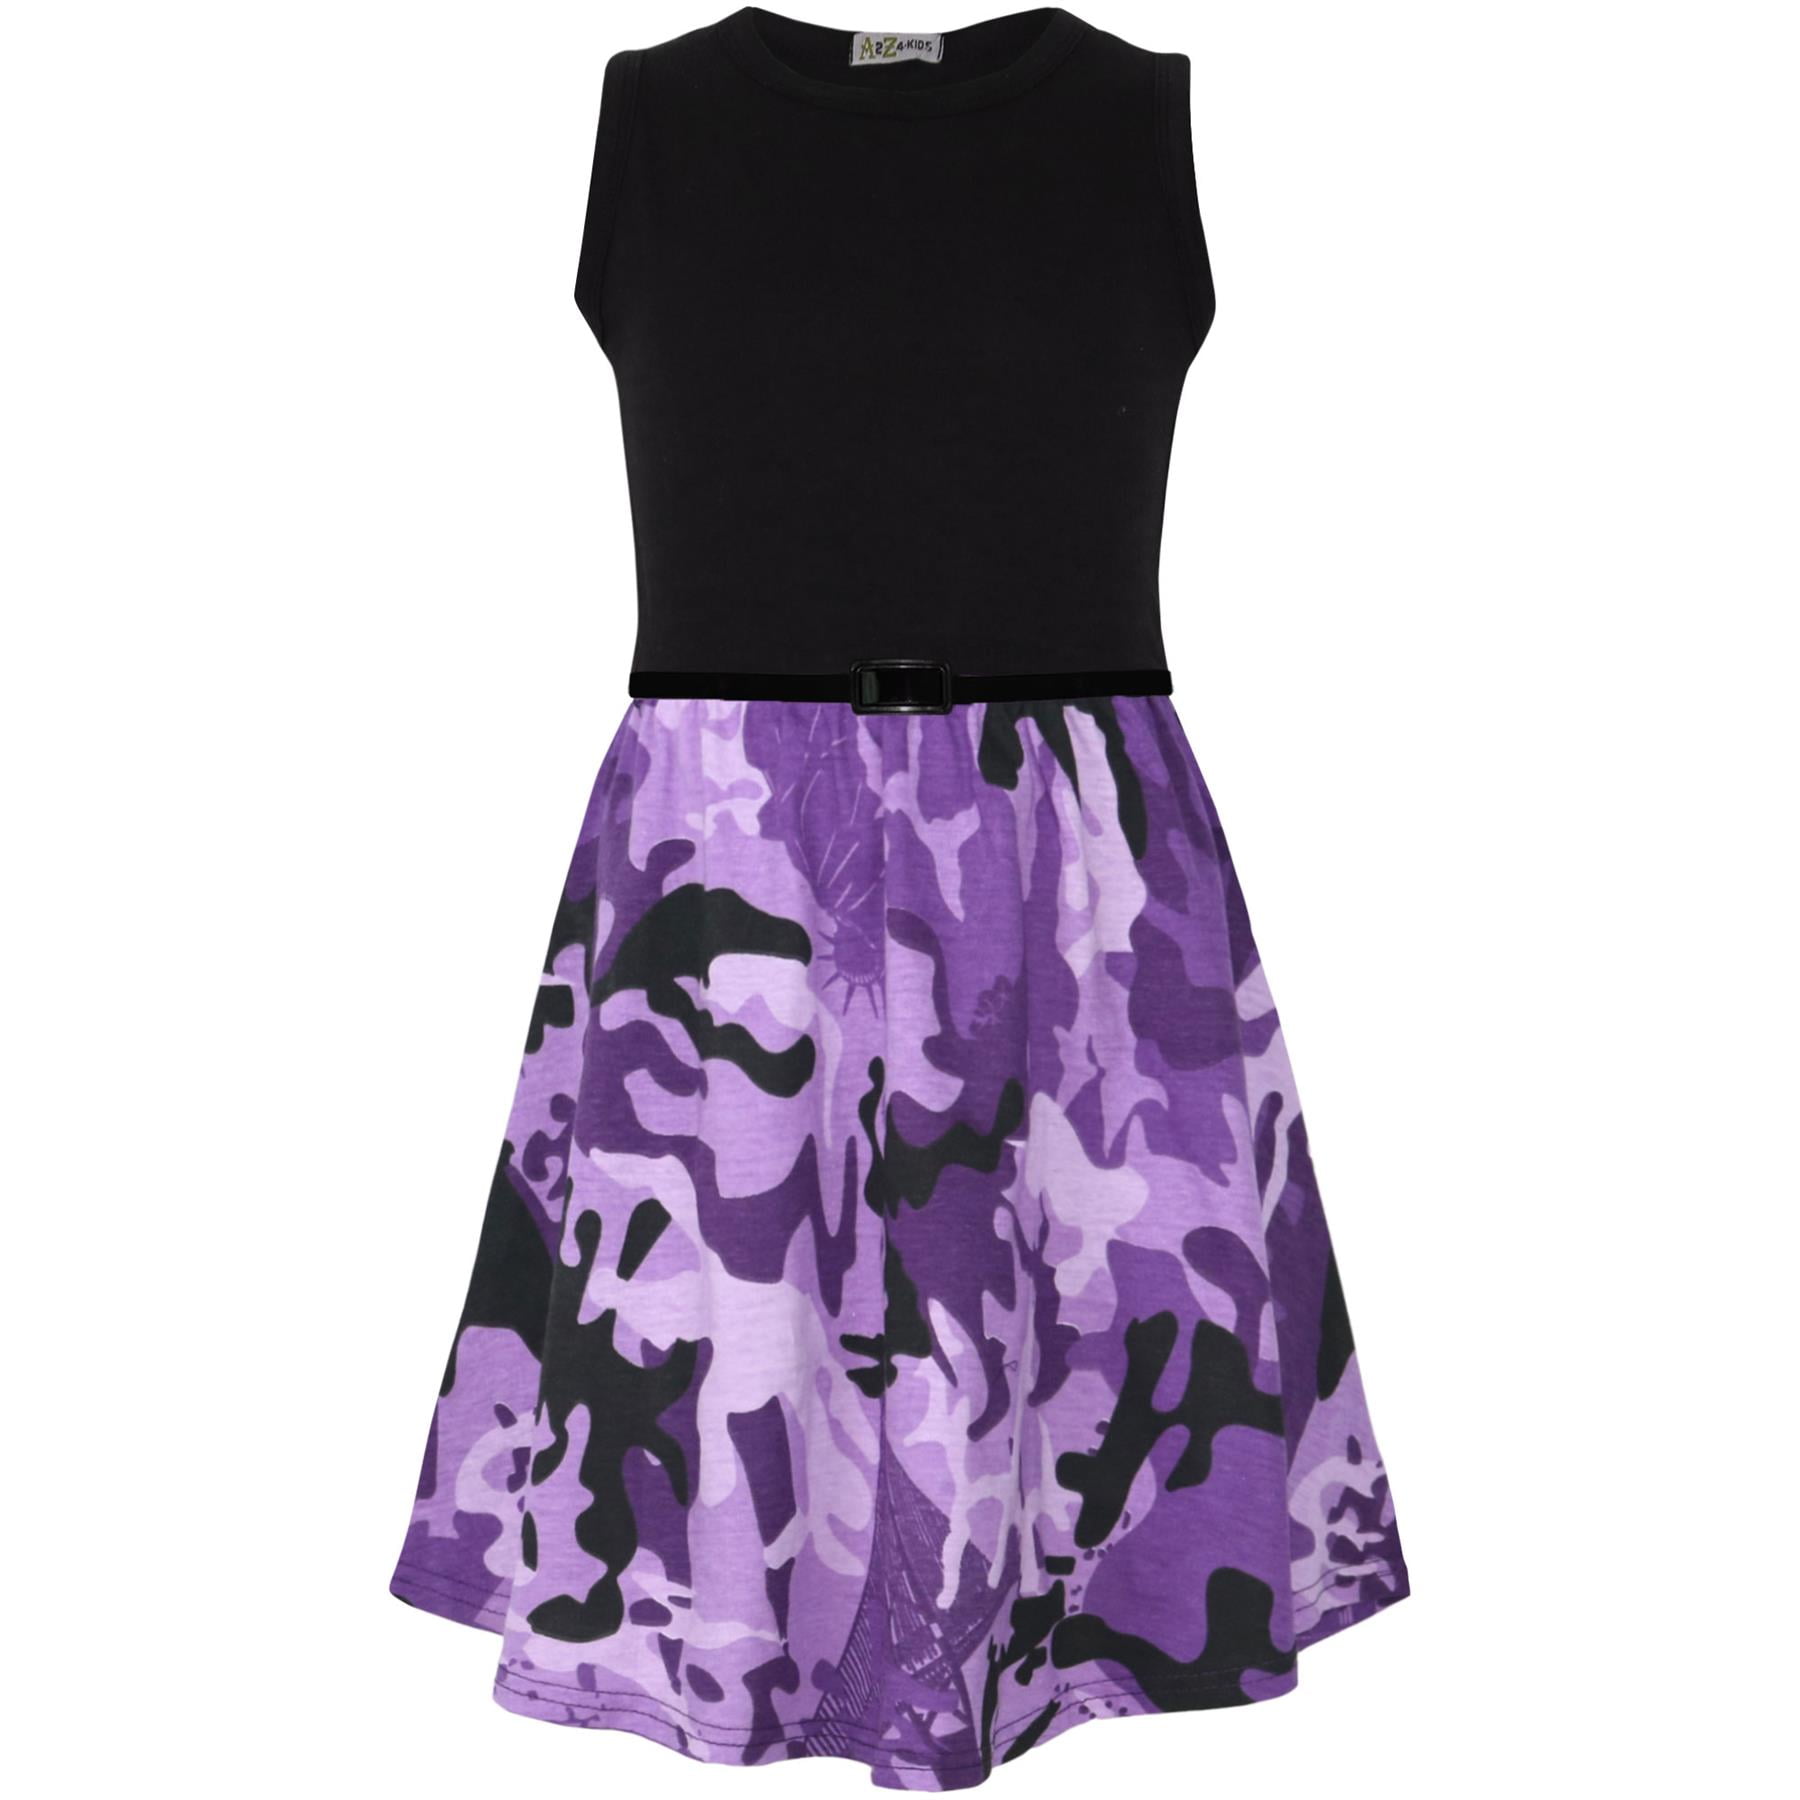 Shop Girl Dress 13 Years Old online | Lazada.com.my